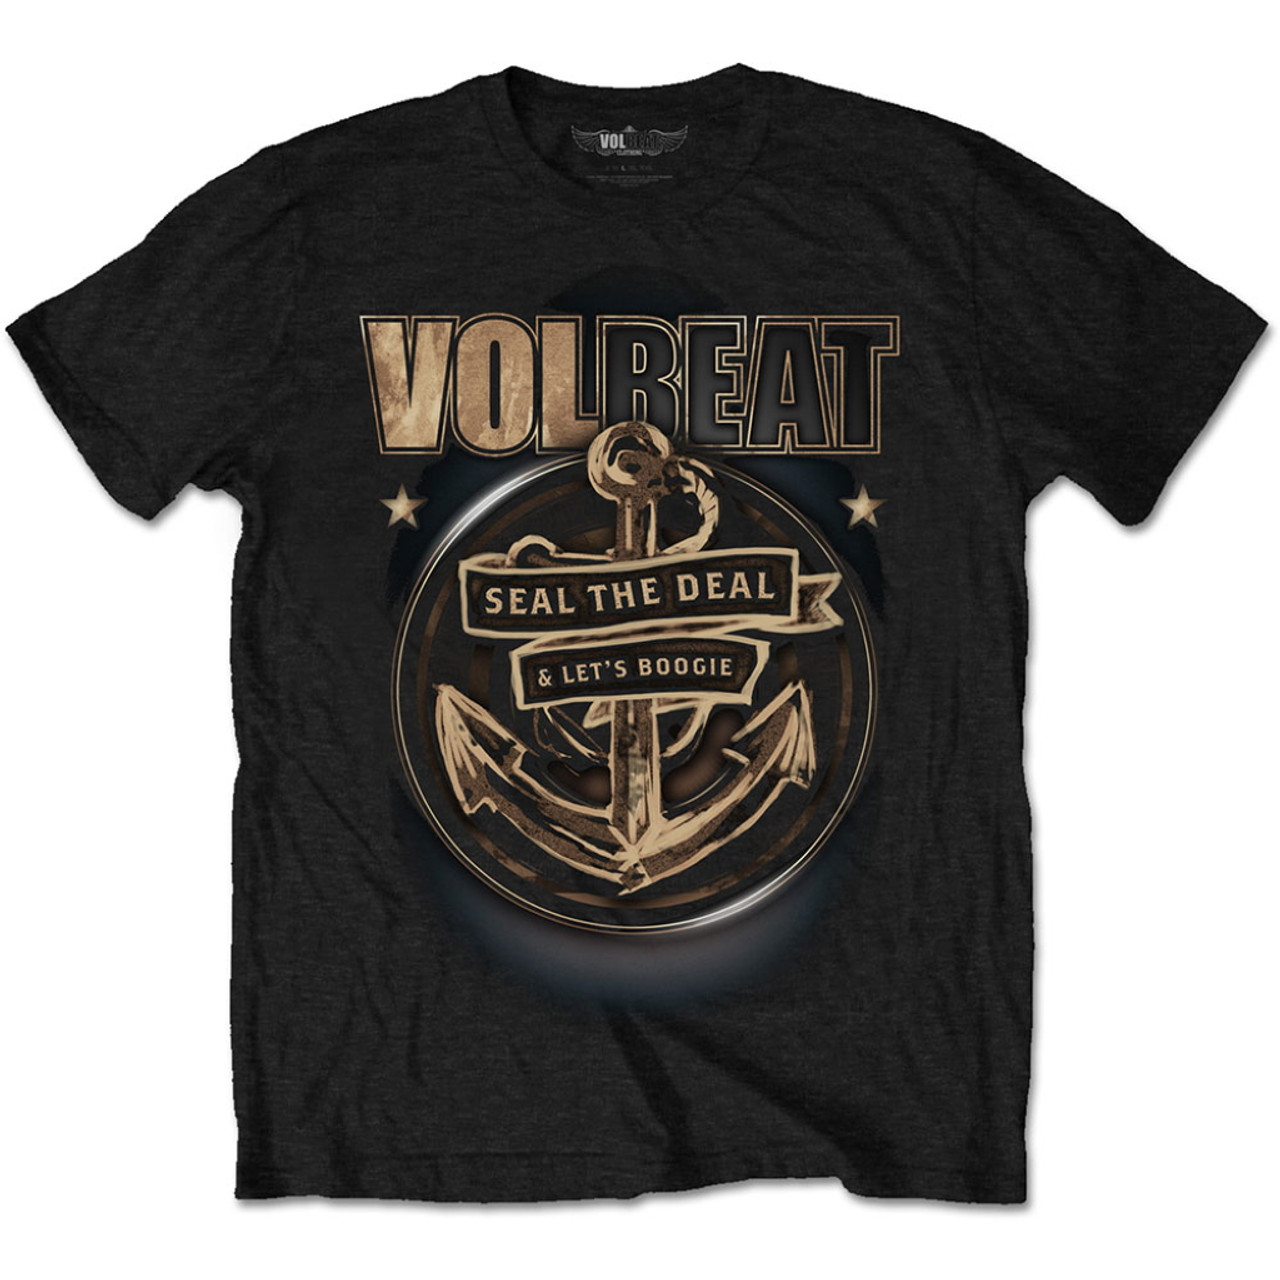 Volbeat 'Old Letters' (Black) T-Shirt